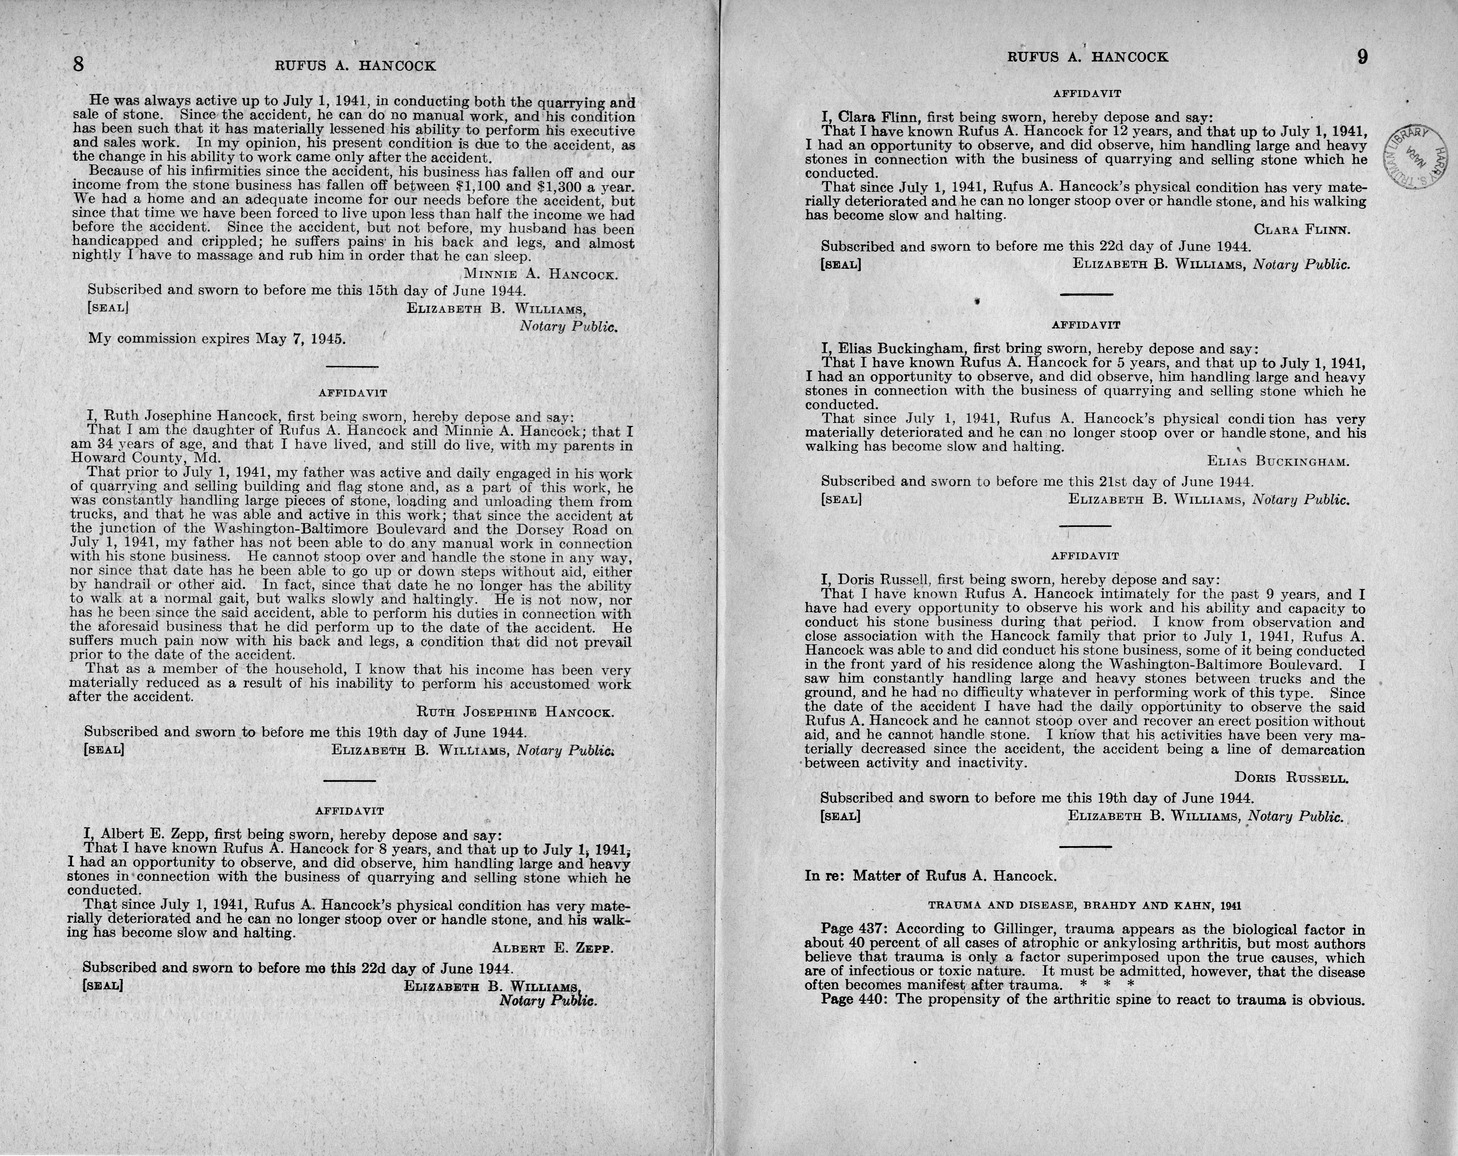 Memorandum from Frederick J. Bailey to M. C. Latta, H.R. 2578, For the Relief of Rufus A. Hancock, with Attachments